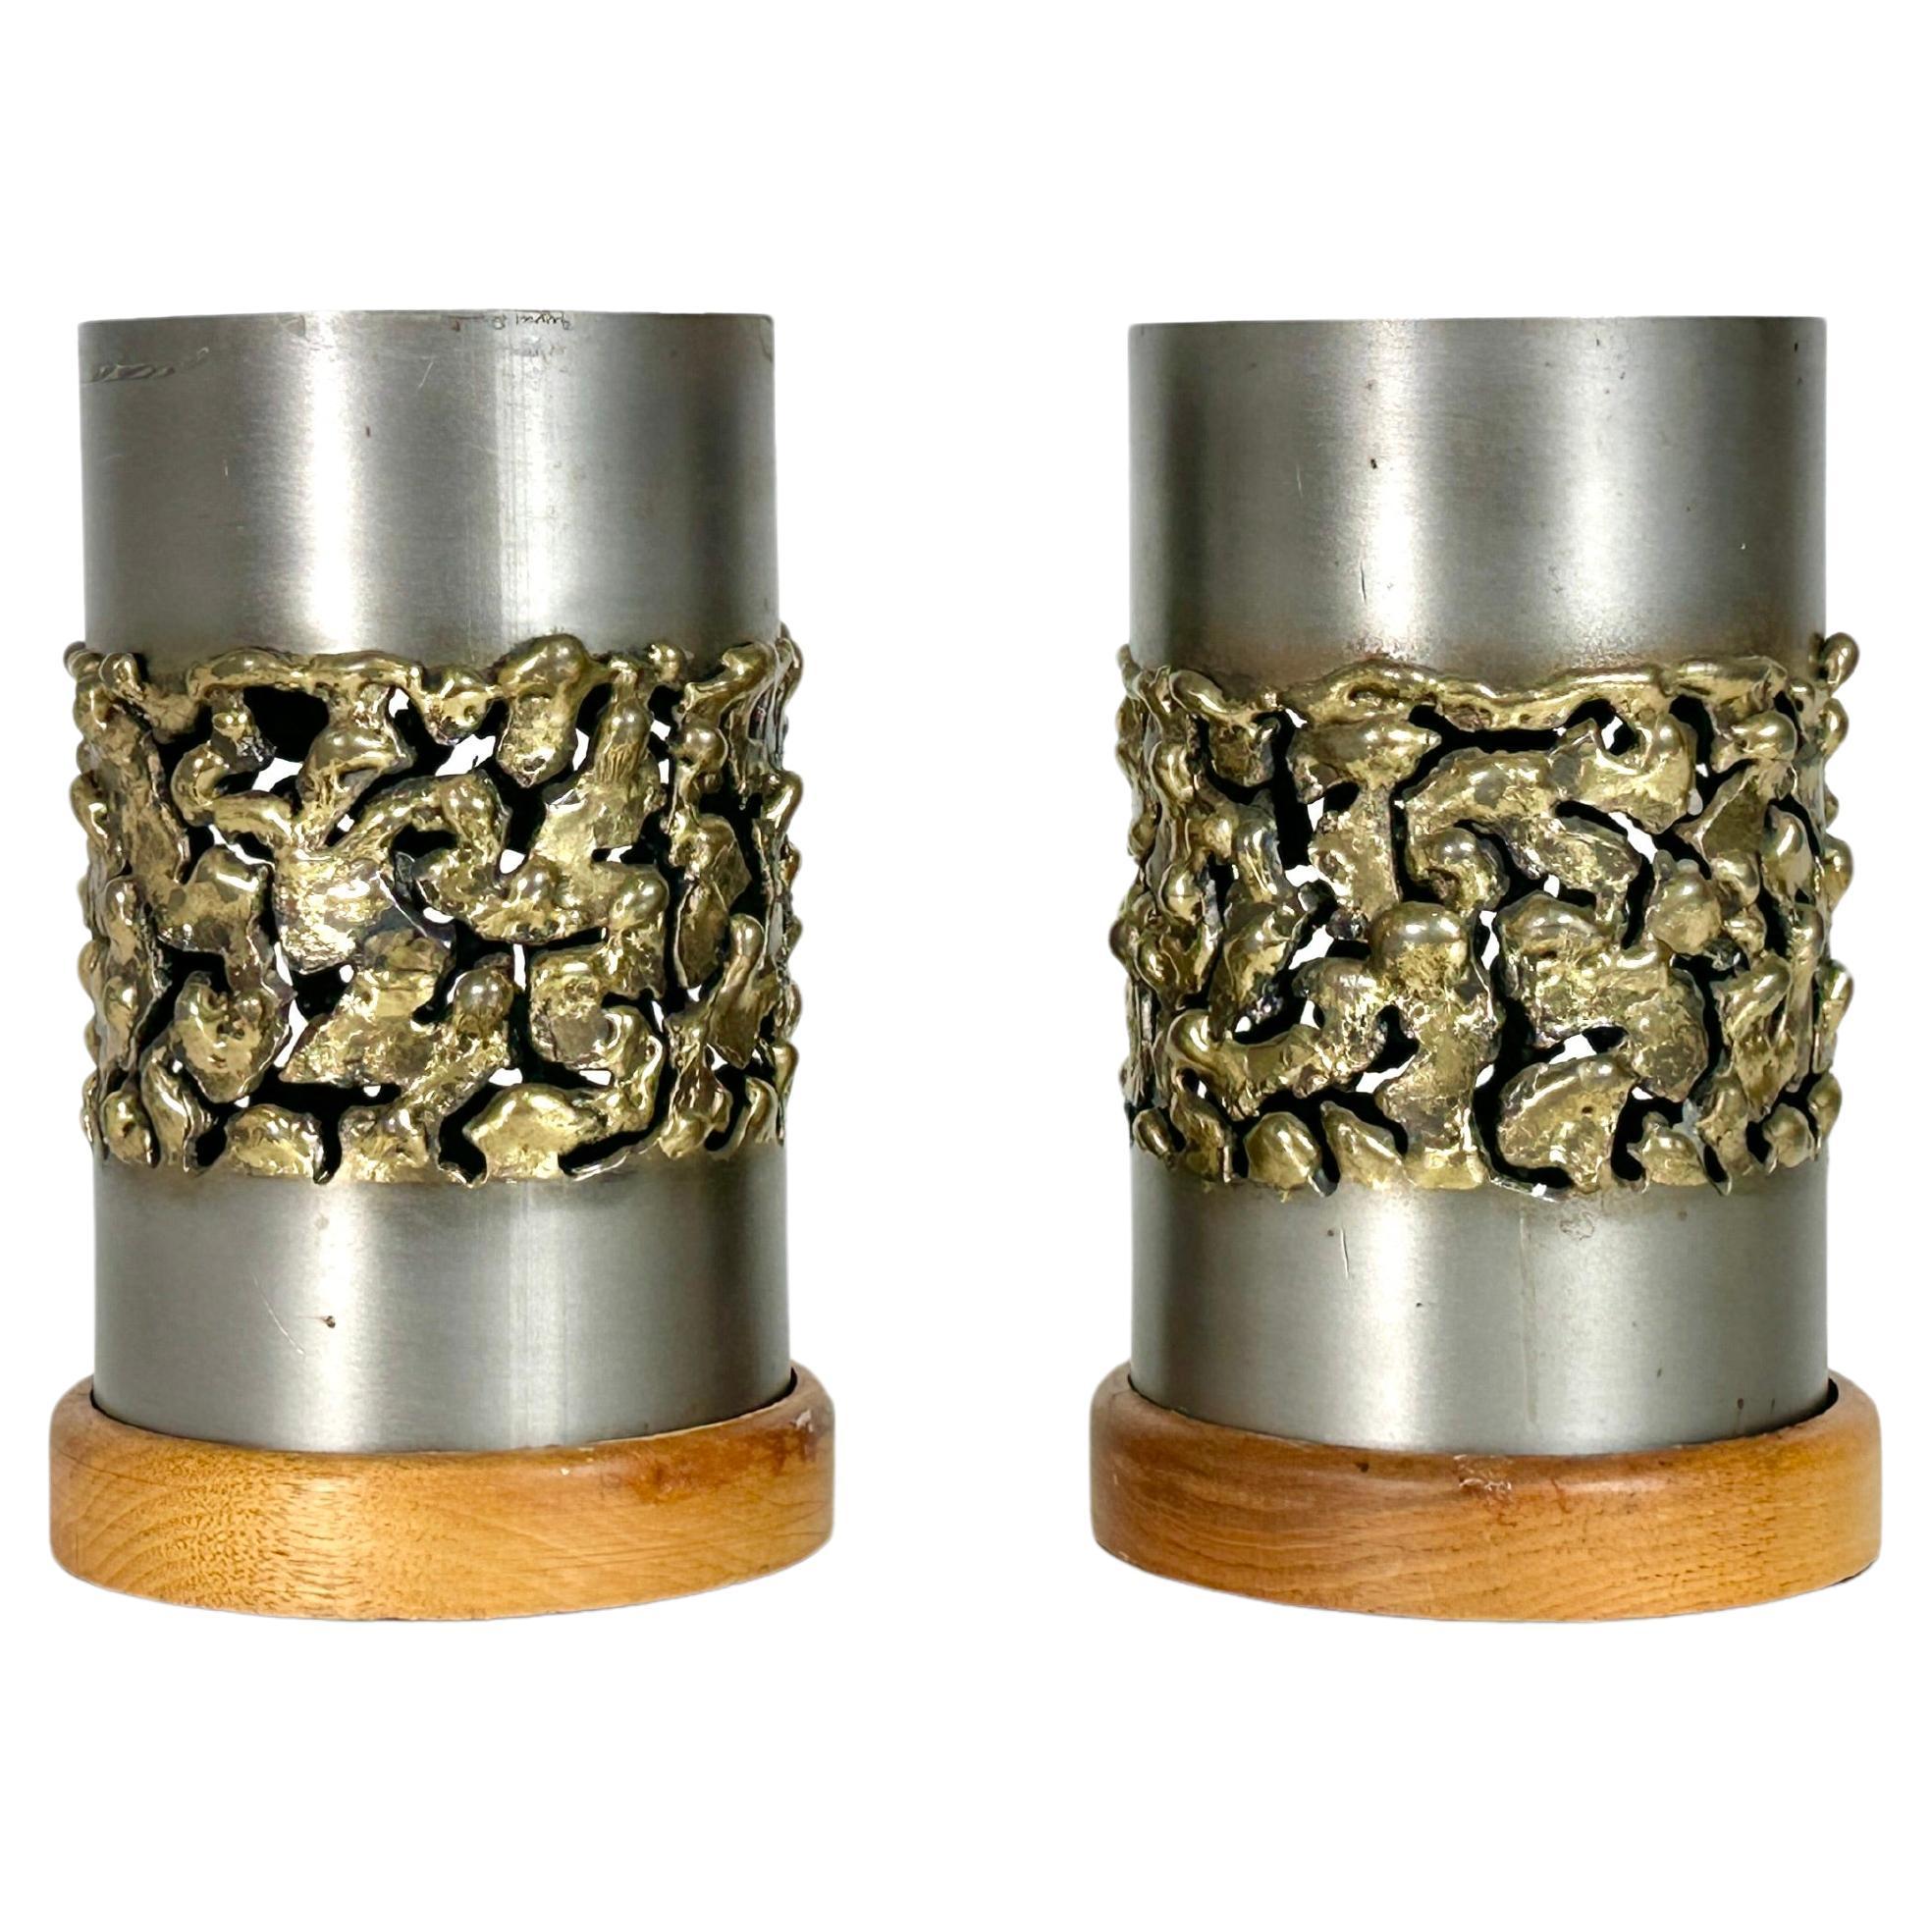 Pair of Mid Century Modern Brutalist Hurricane Candle Holders by Jerry Davis For Sale